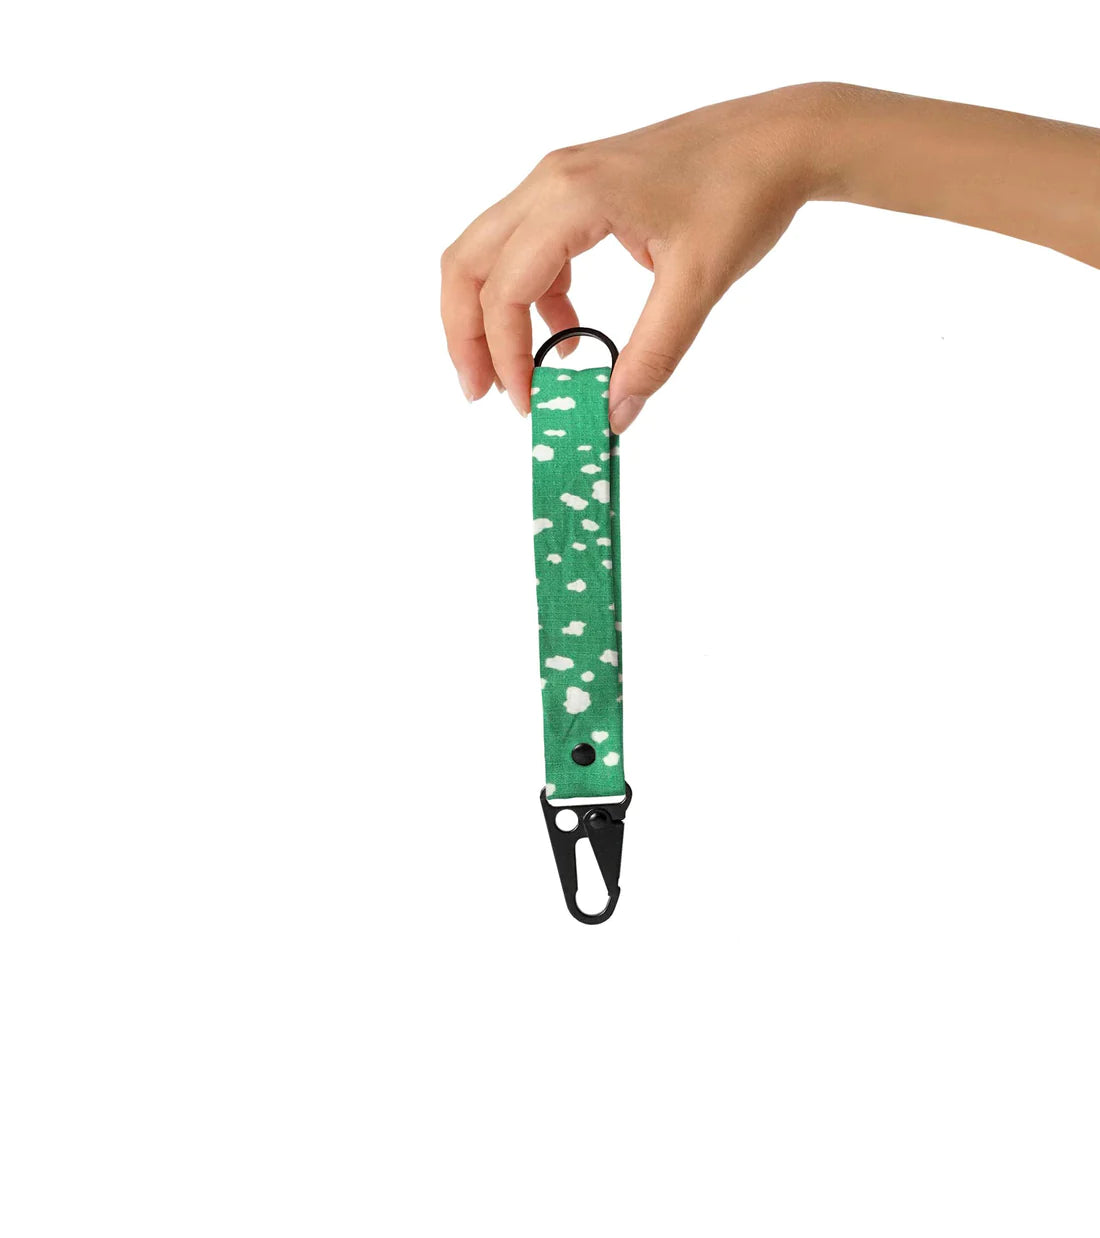 Hand holding Notabag Keychain in green sprinkle pattern